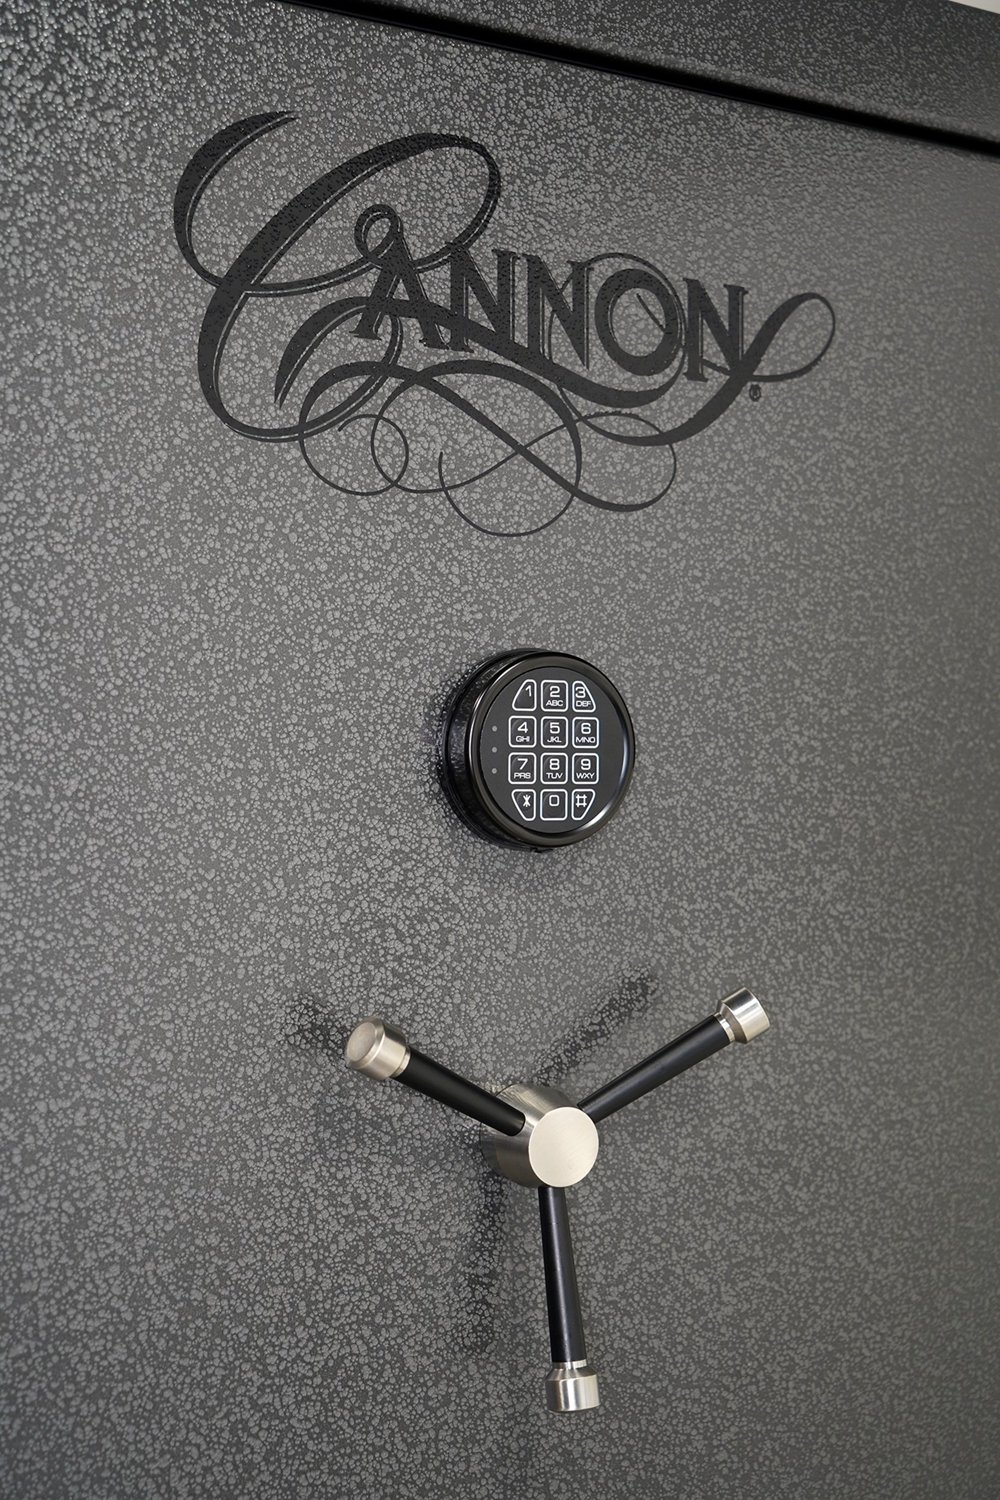 Cannon Armory 24-Gun Fireproof and Waterproof Electronic/Keypad